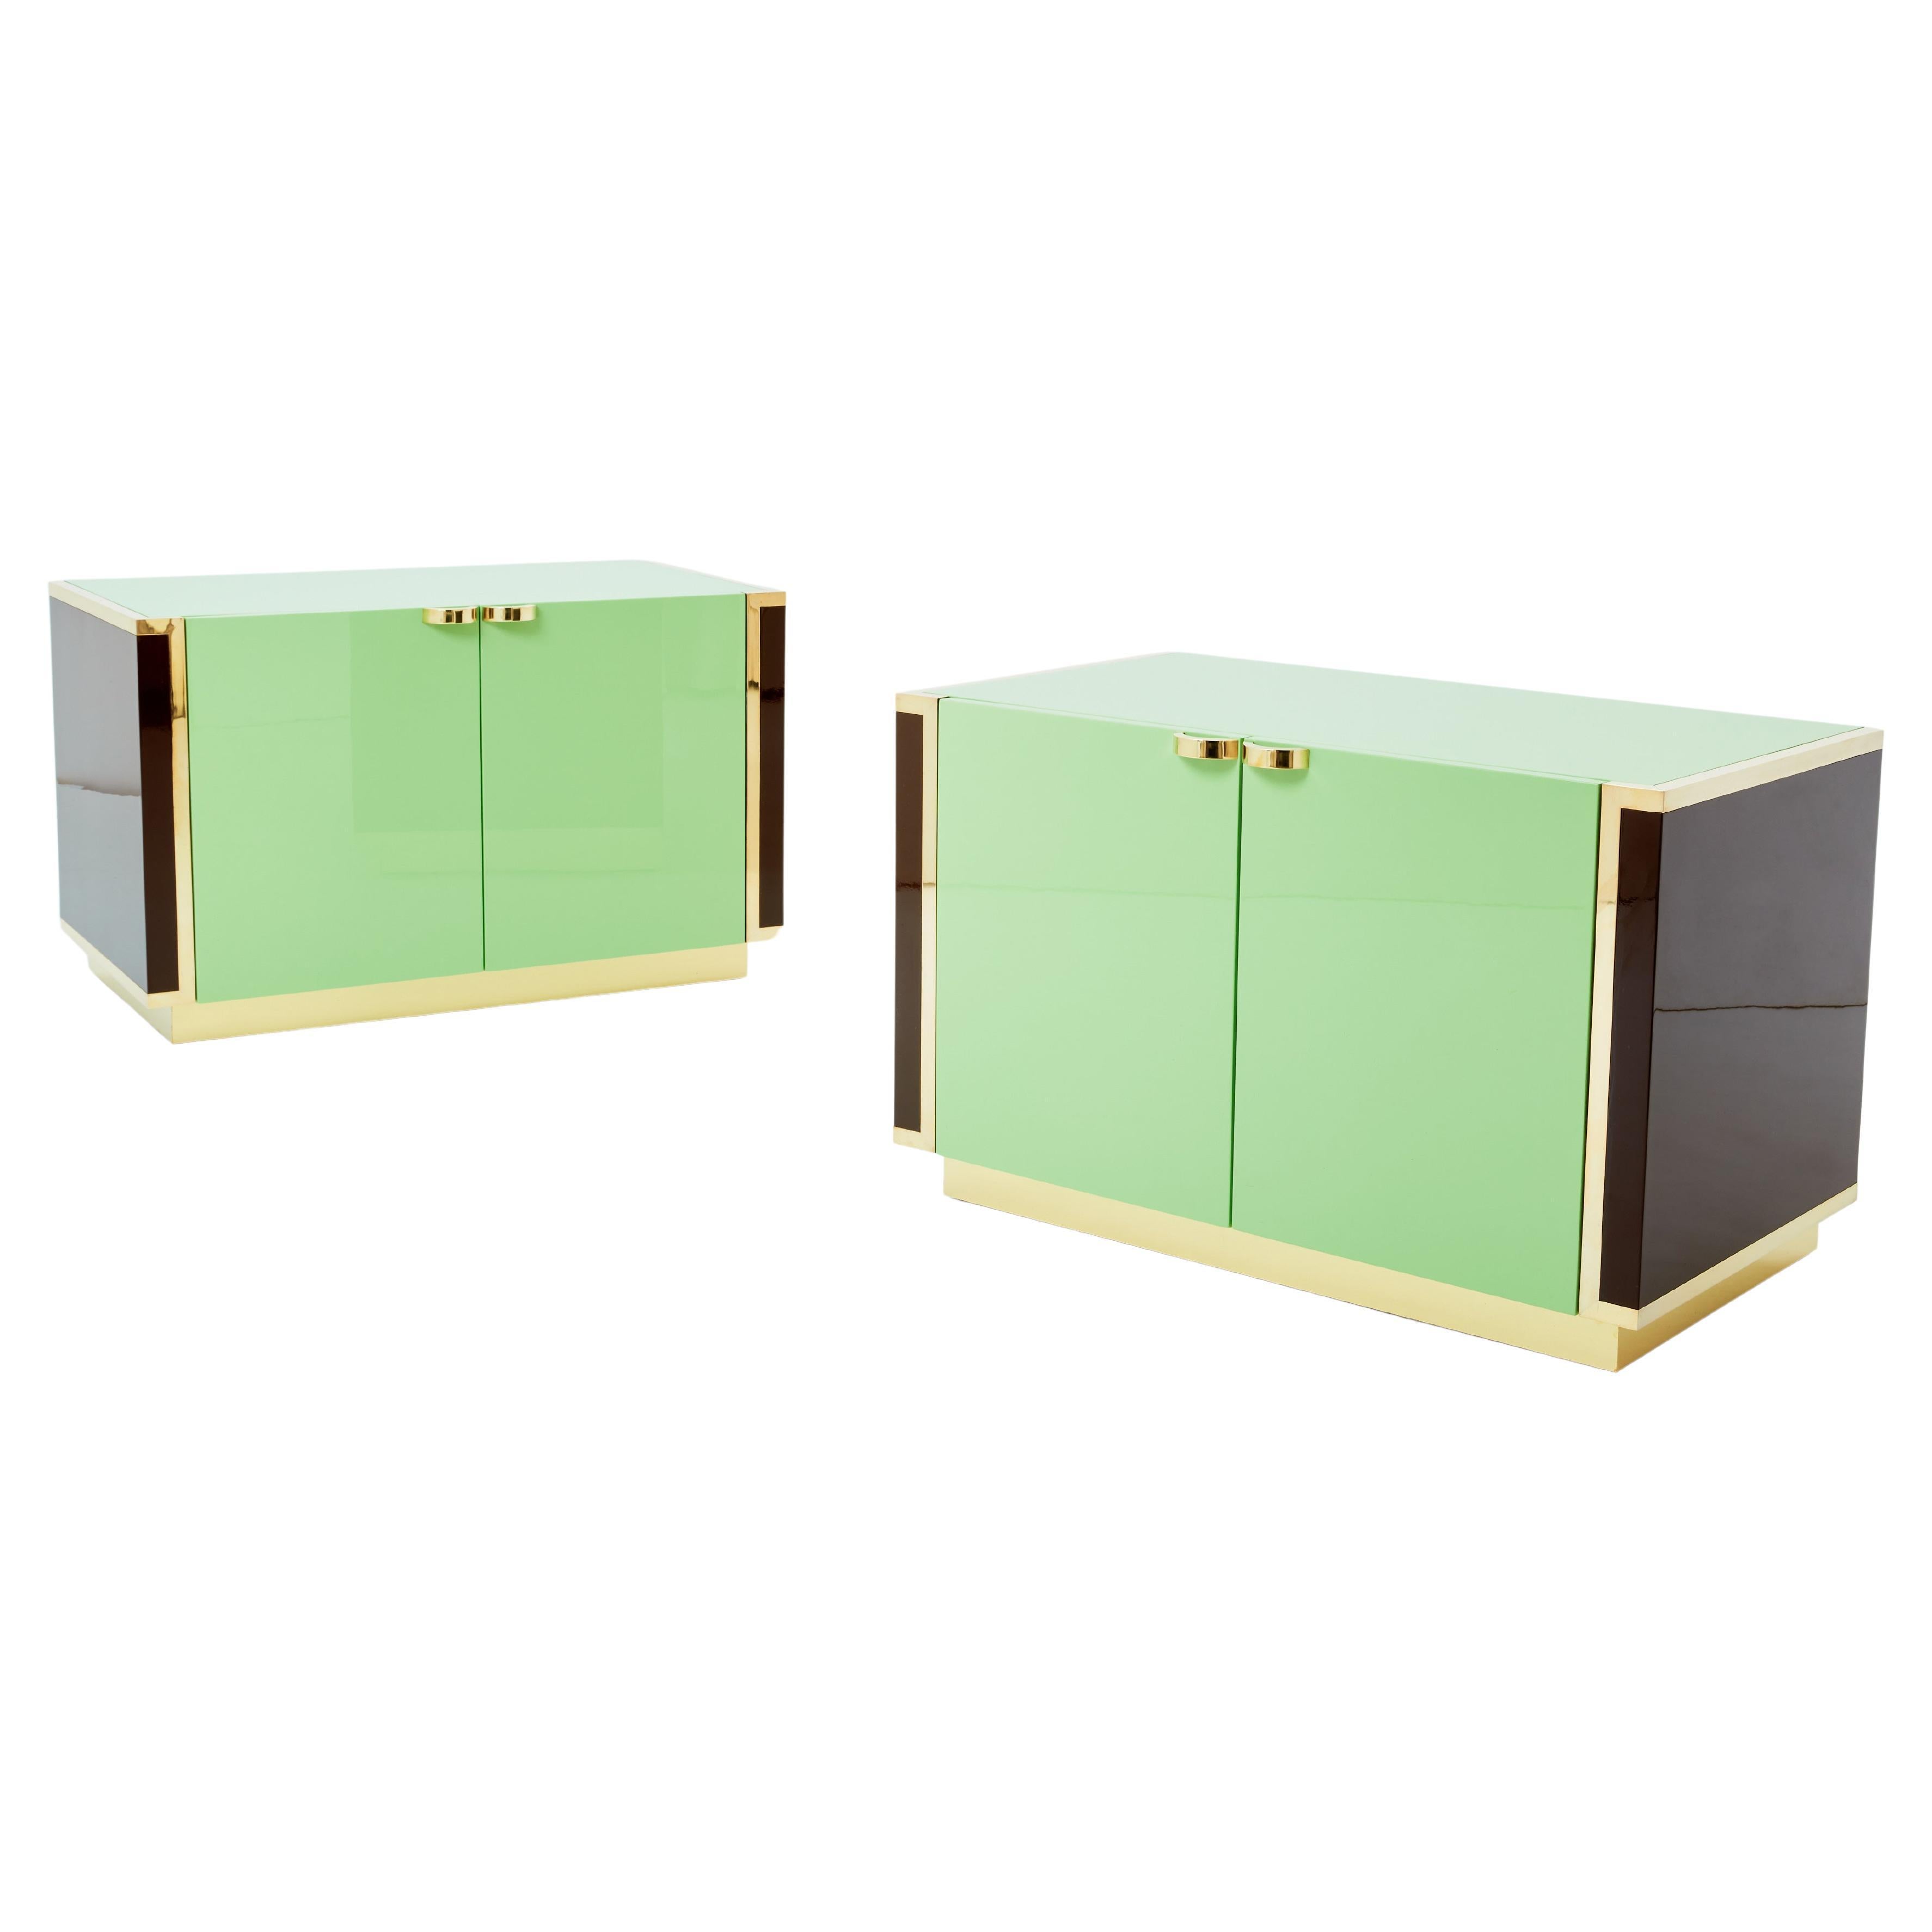 J.C. Mahey pair of small green lacquer and brass cabinets 1970s For Sale